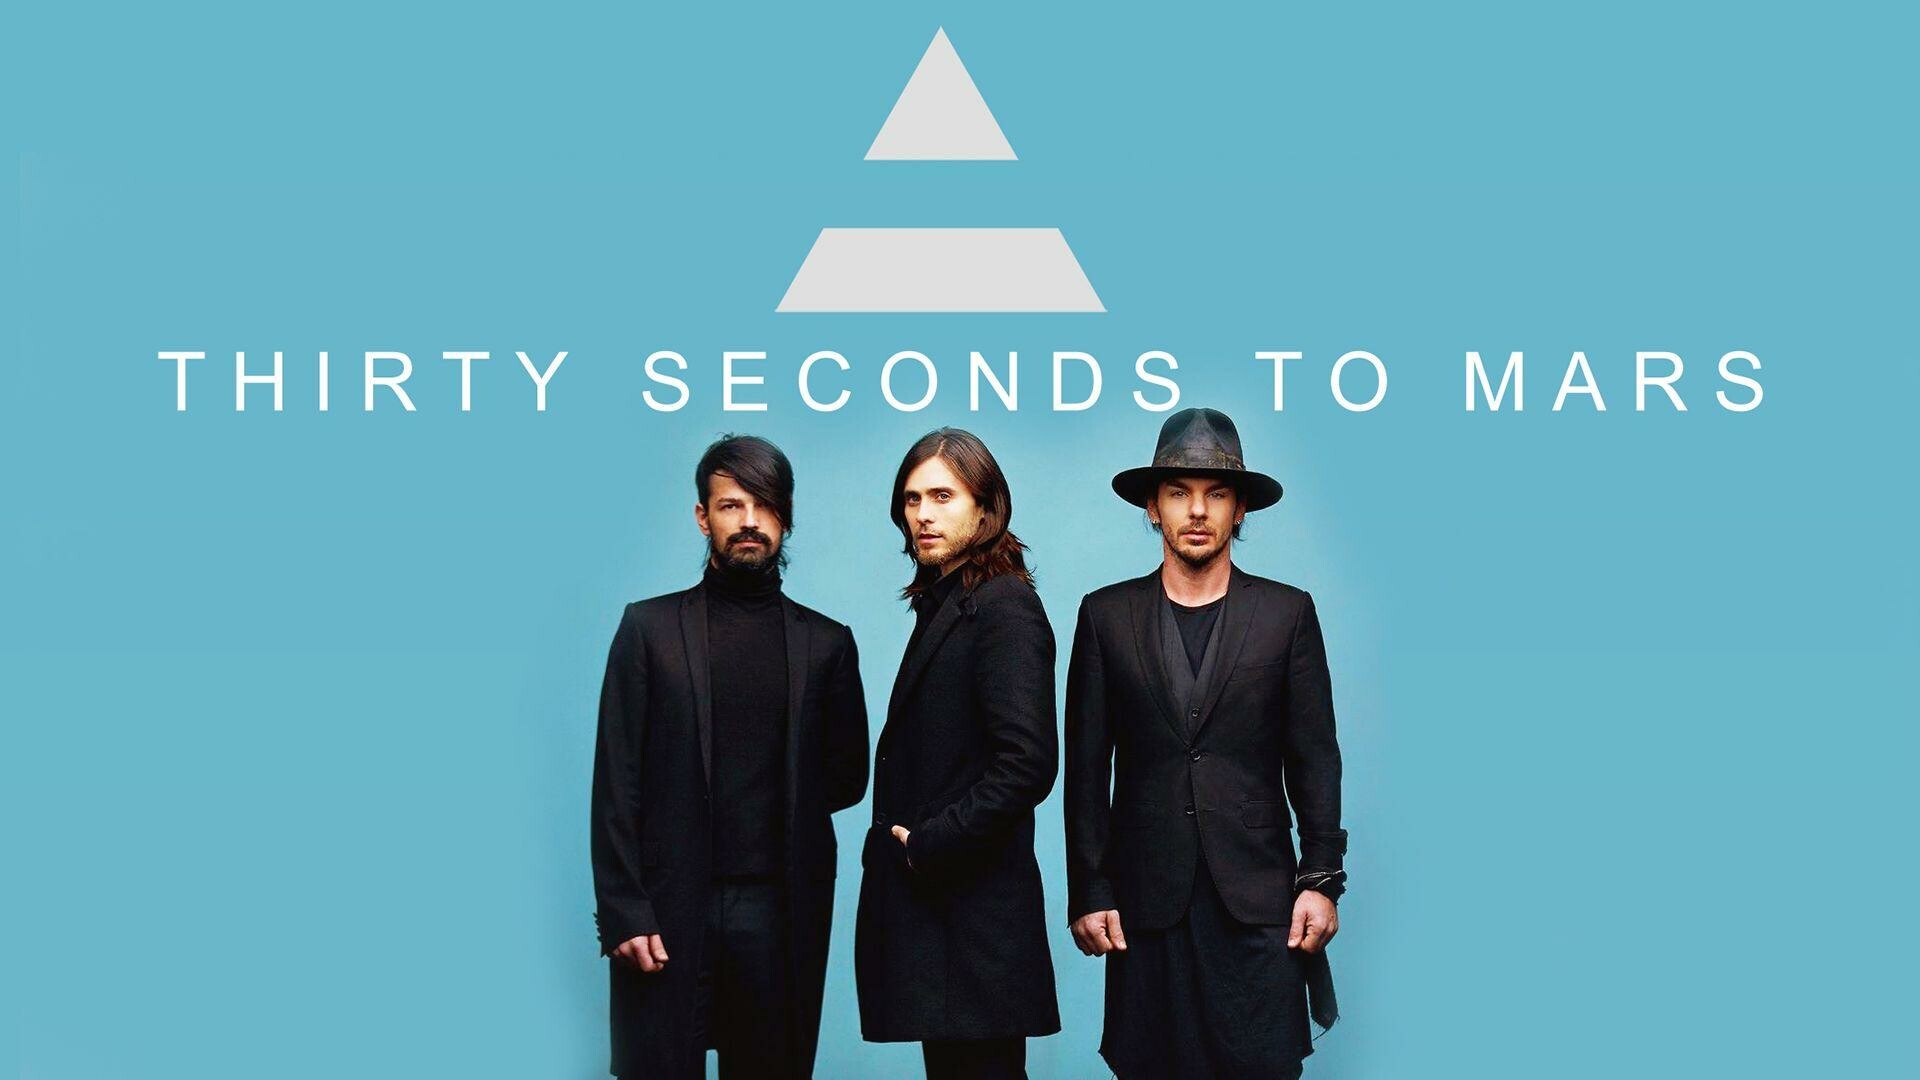 Thirty Seconds to Mars: A Beautiful Lie produced four singles, "Attack", "The Kill", "From Yesterday", and "A Beautiful Lie". 1920x1080 Full HD Wallpaper.